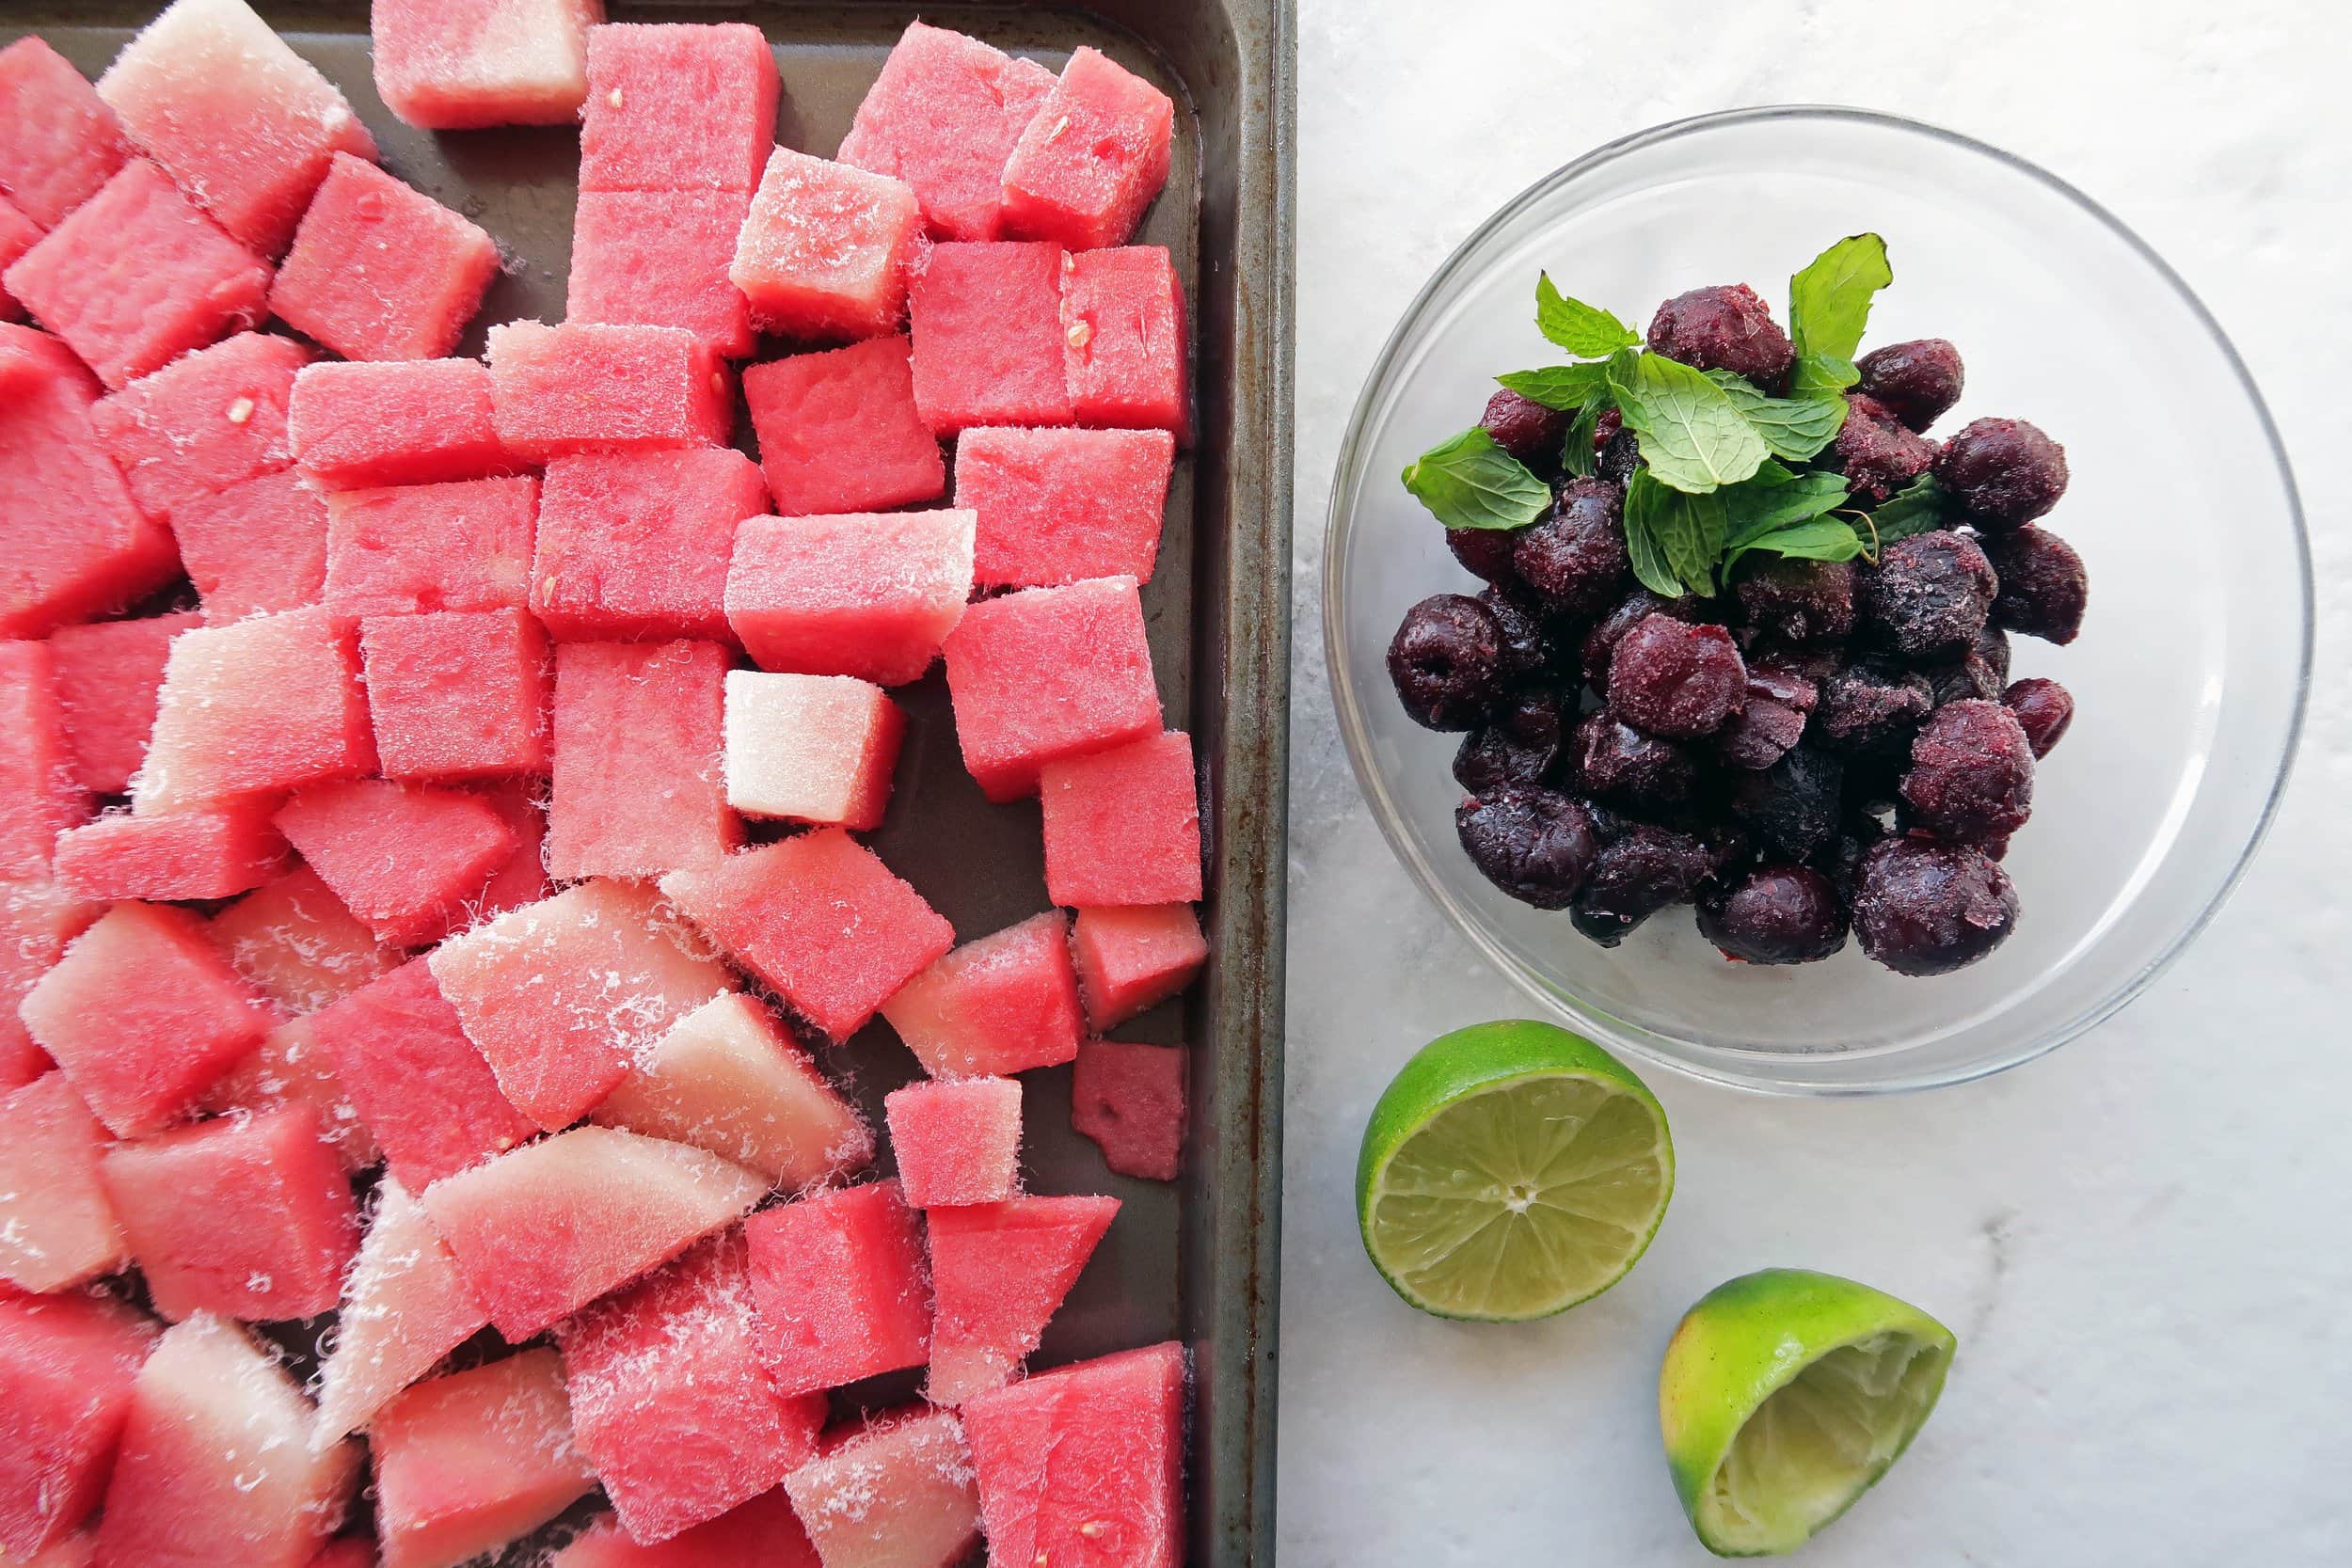 Frozen cubed watermelon on a baking sheet, frozen cherries in a bowl, and a lime on the side.